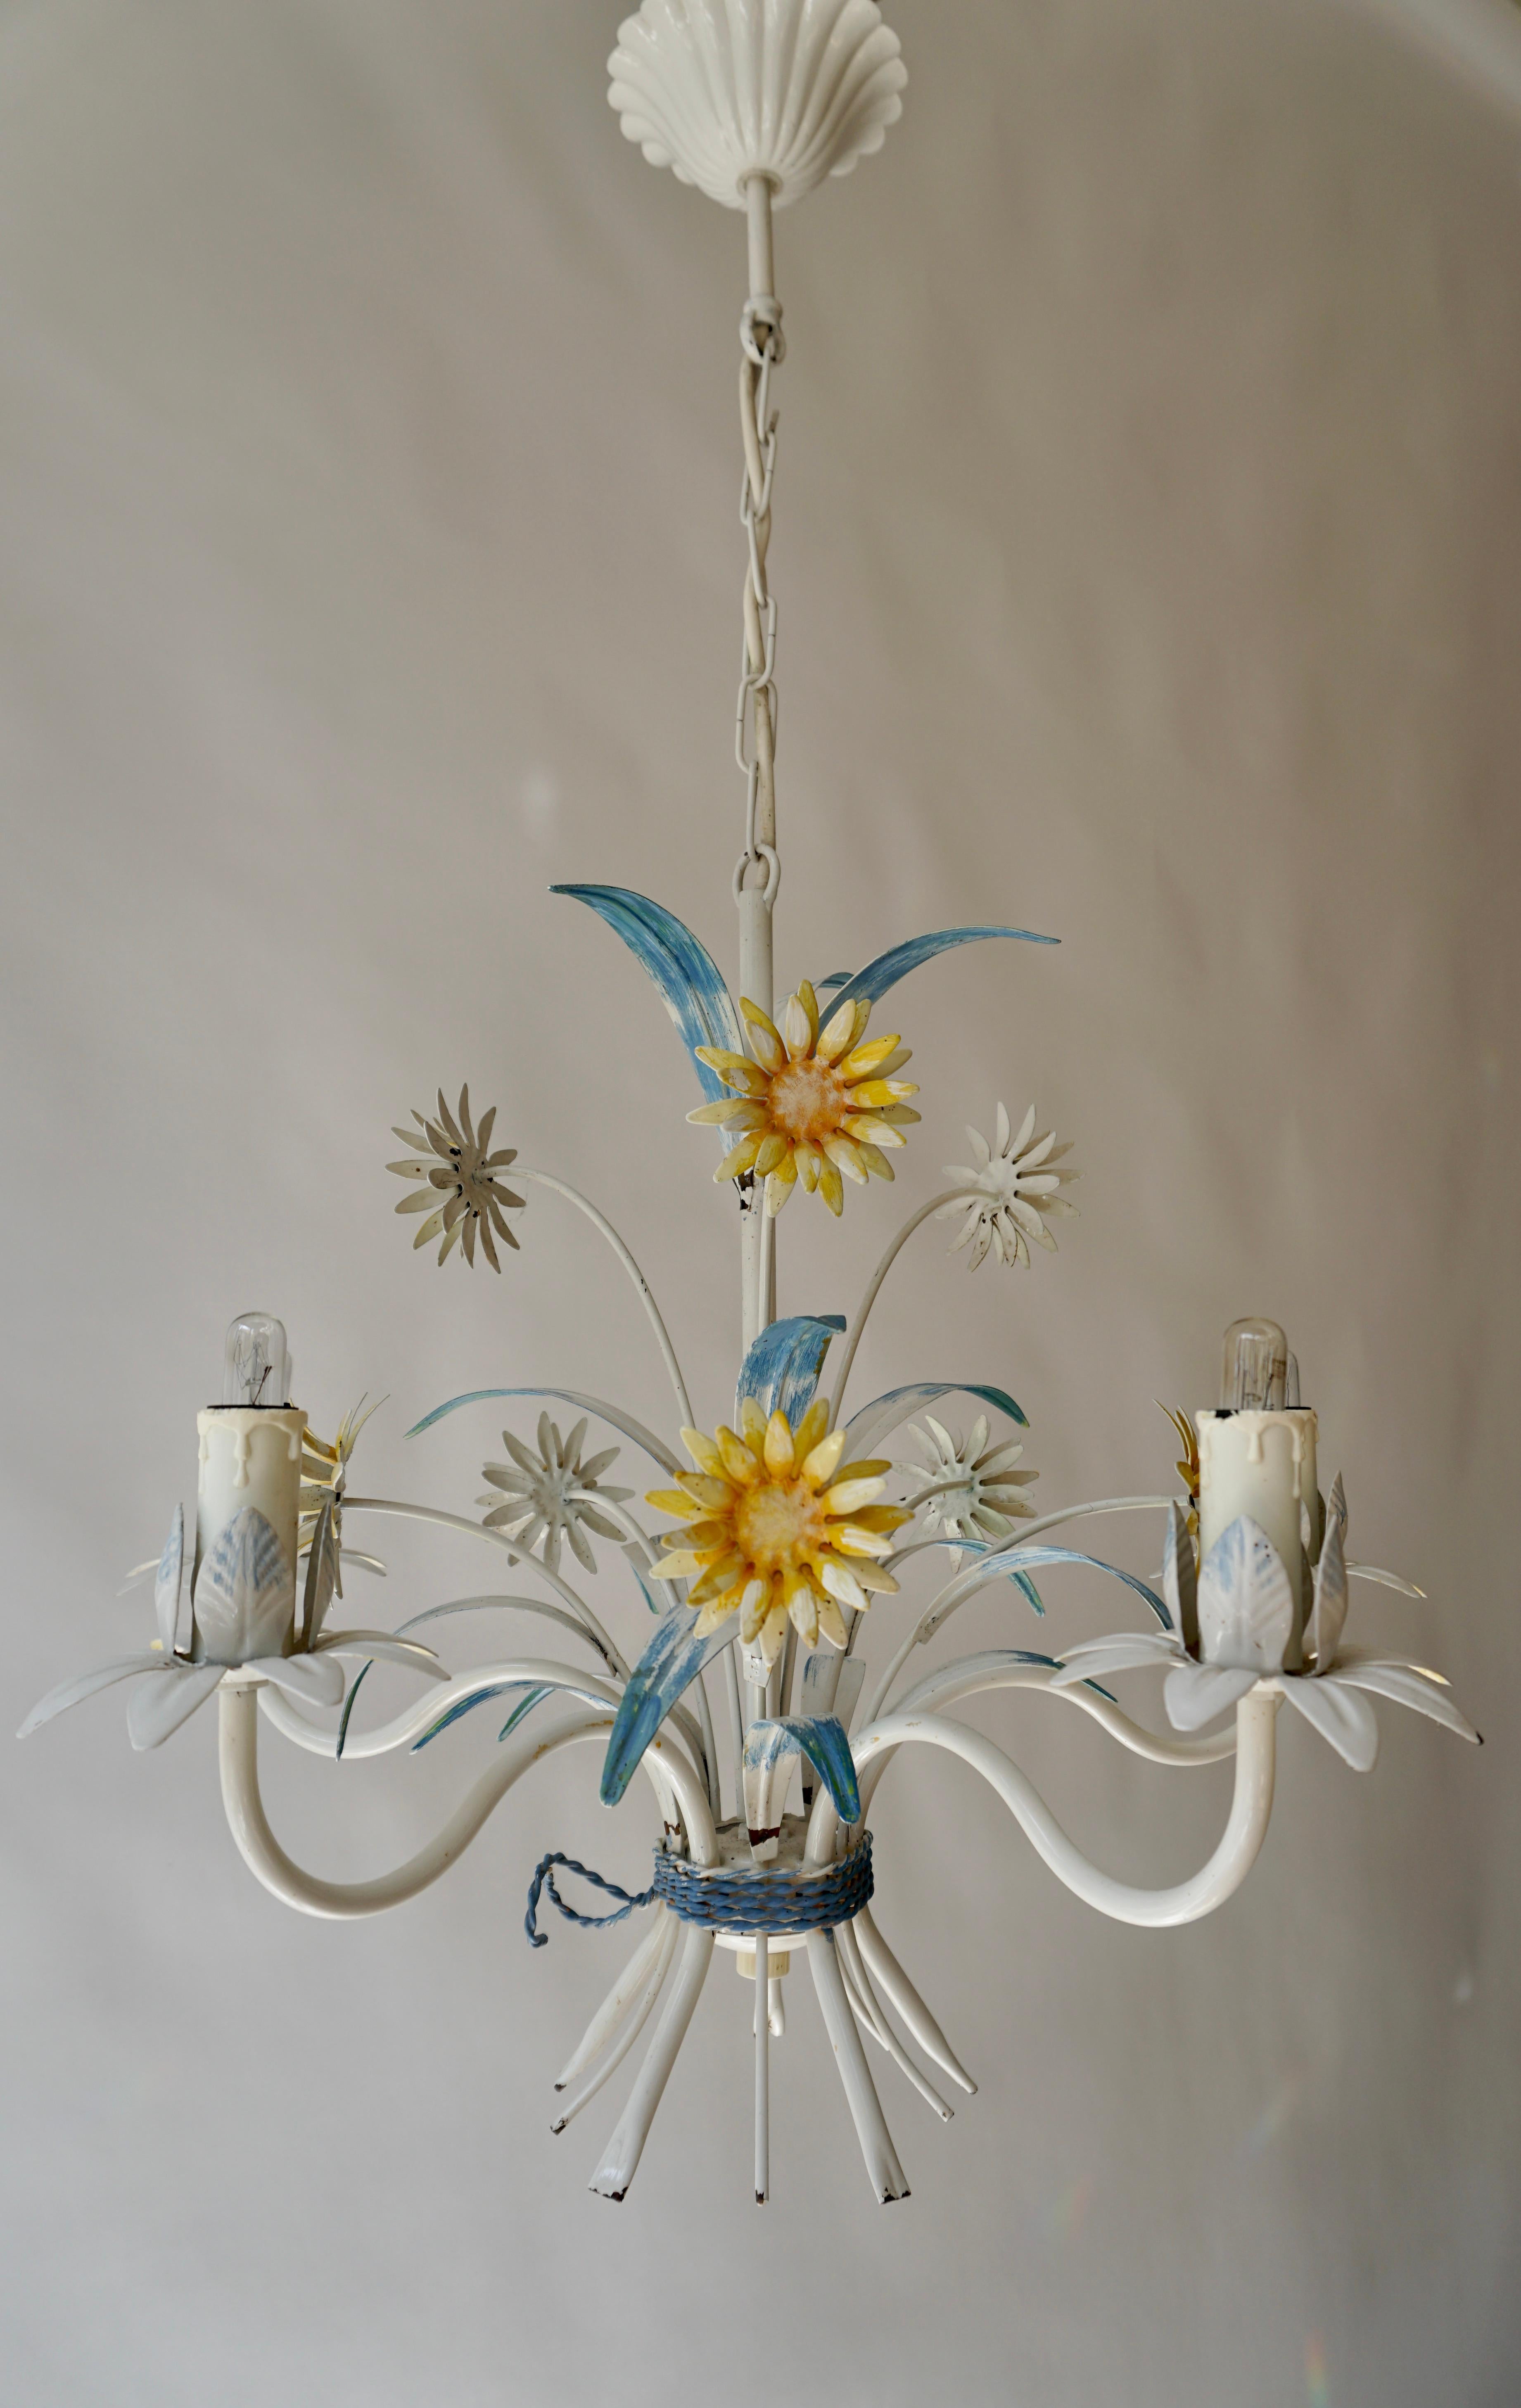 A vintage painted tôle light fixture from the mid 20th century, with five lights. Created during the midcentury period, this light fixture attracts our attention with its yellow painted flowers and blue leaves. This chandelier will bring a whimsical